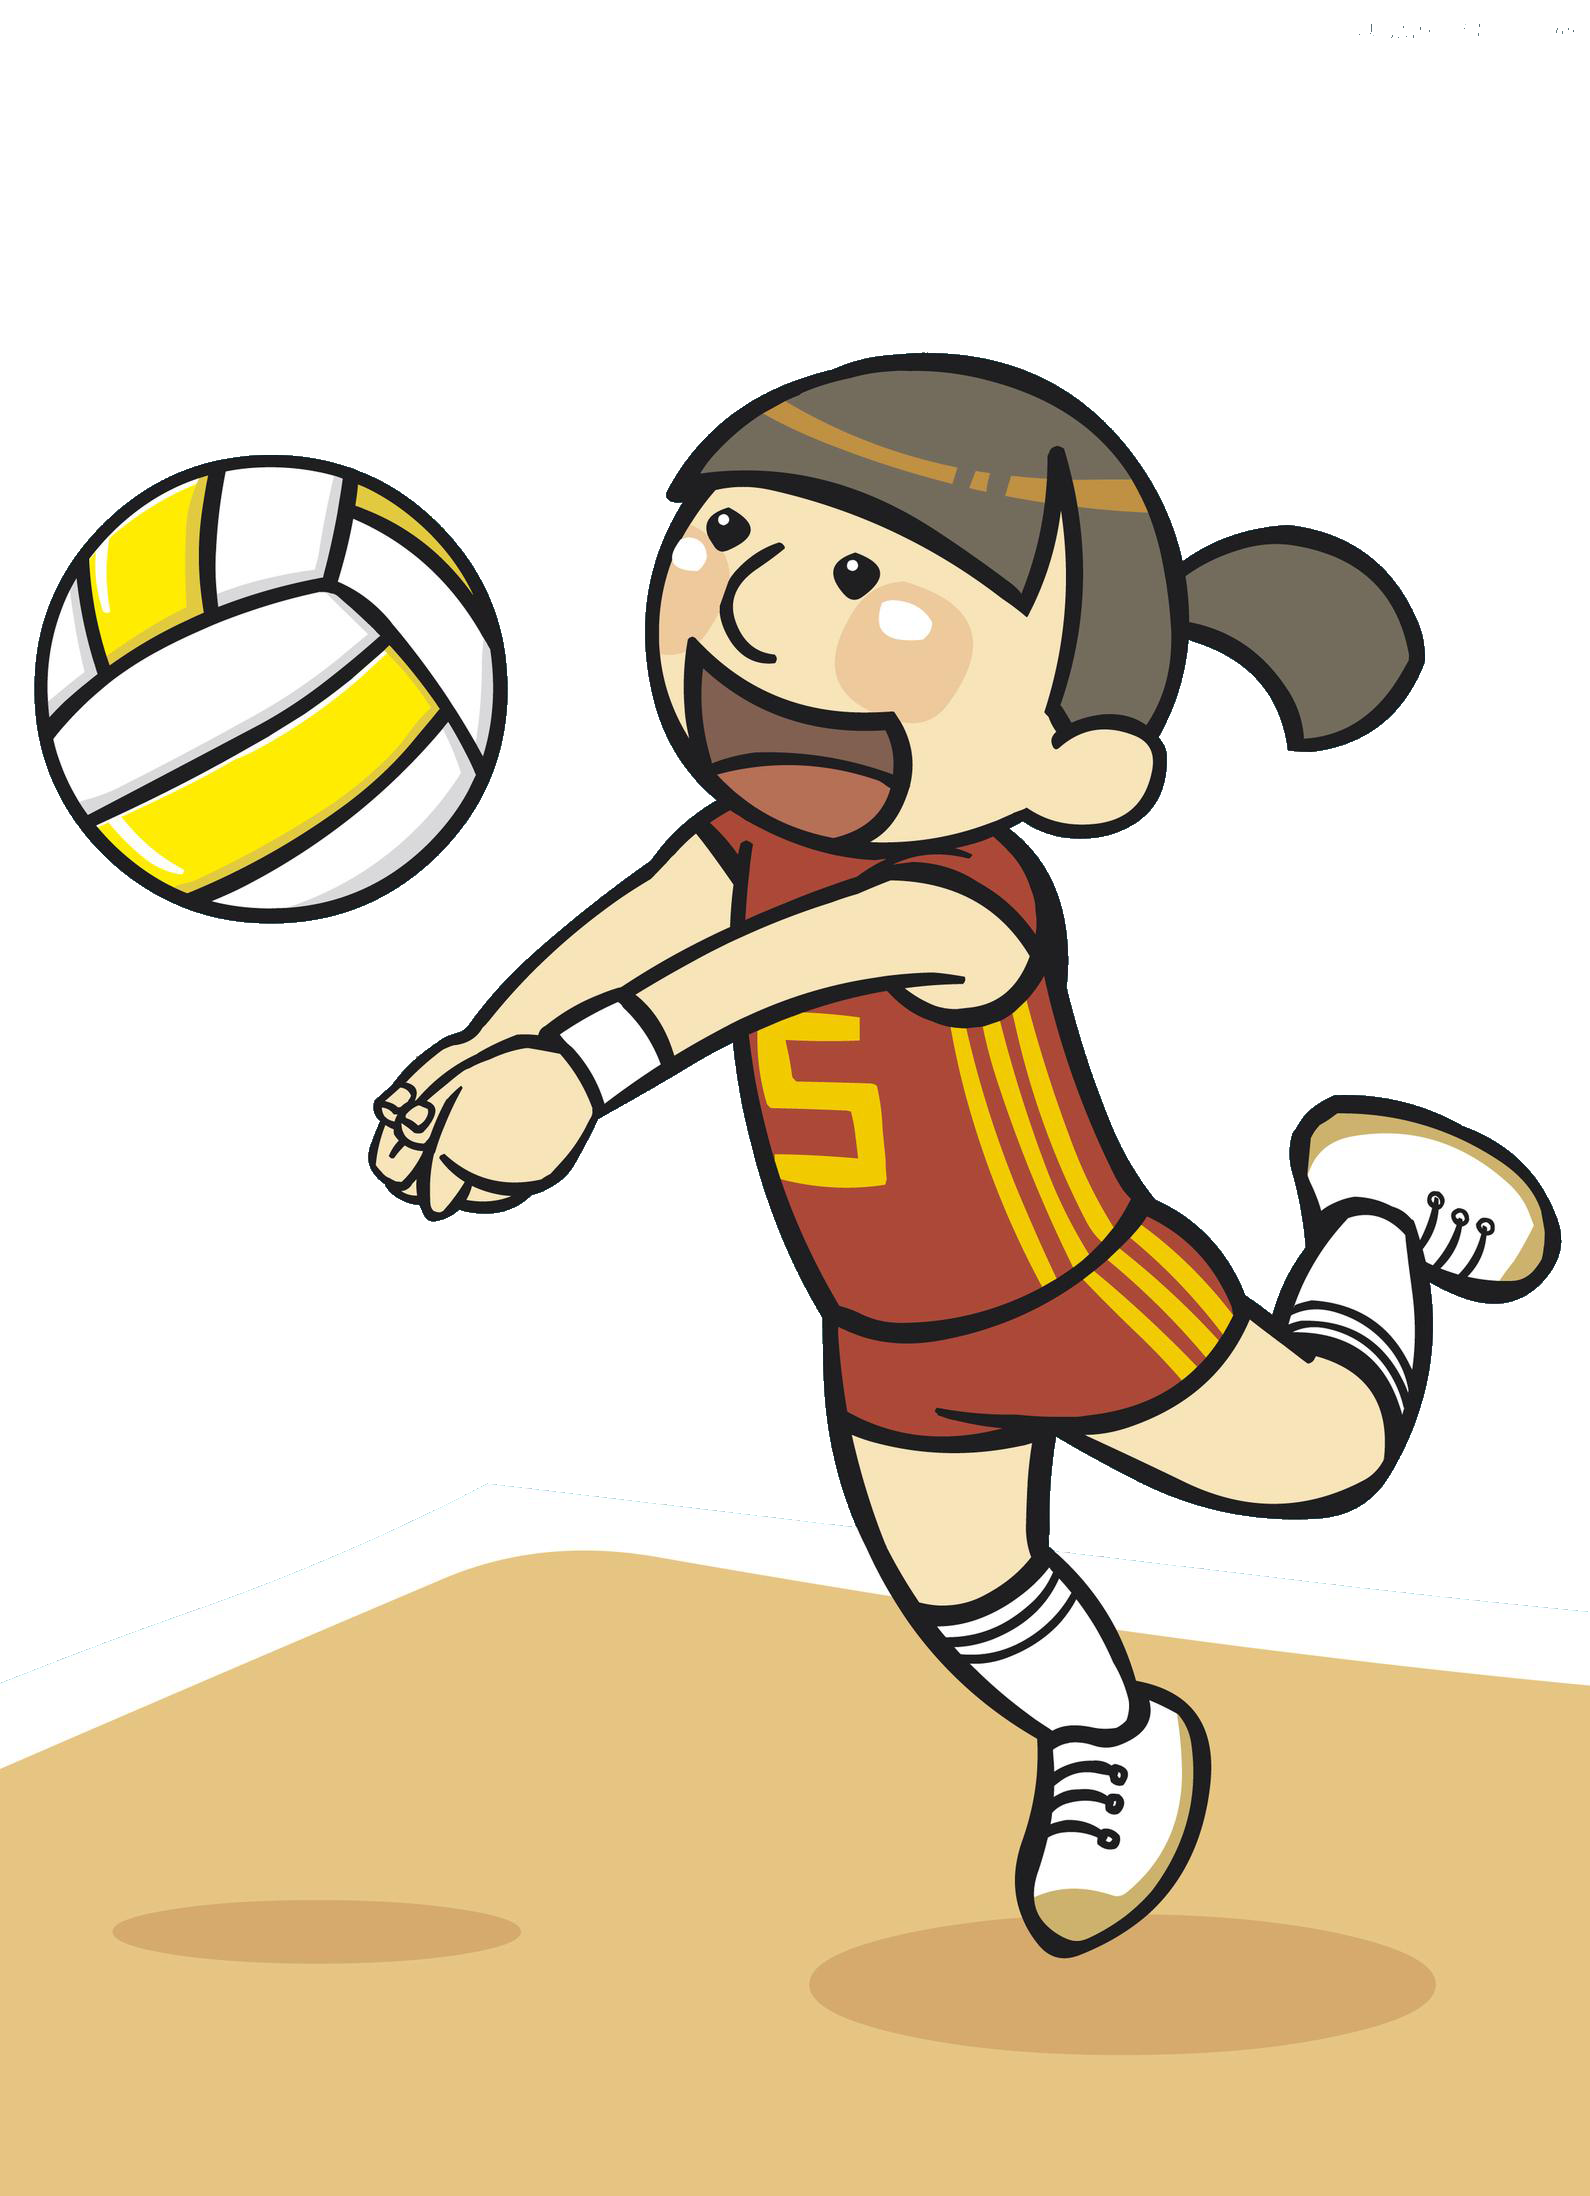 Picture #2508987 - clipart volleyball women's volleyball. clipart voll...